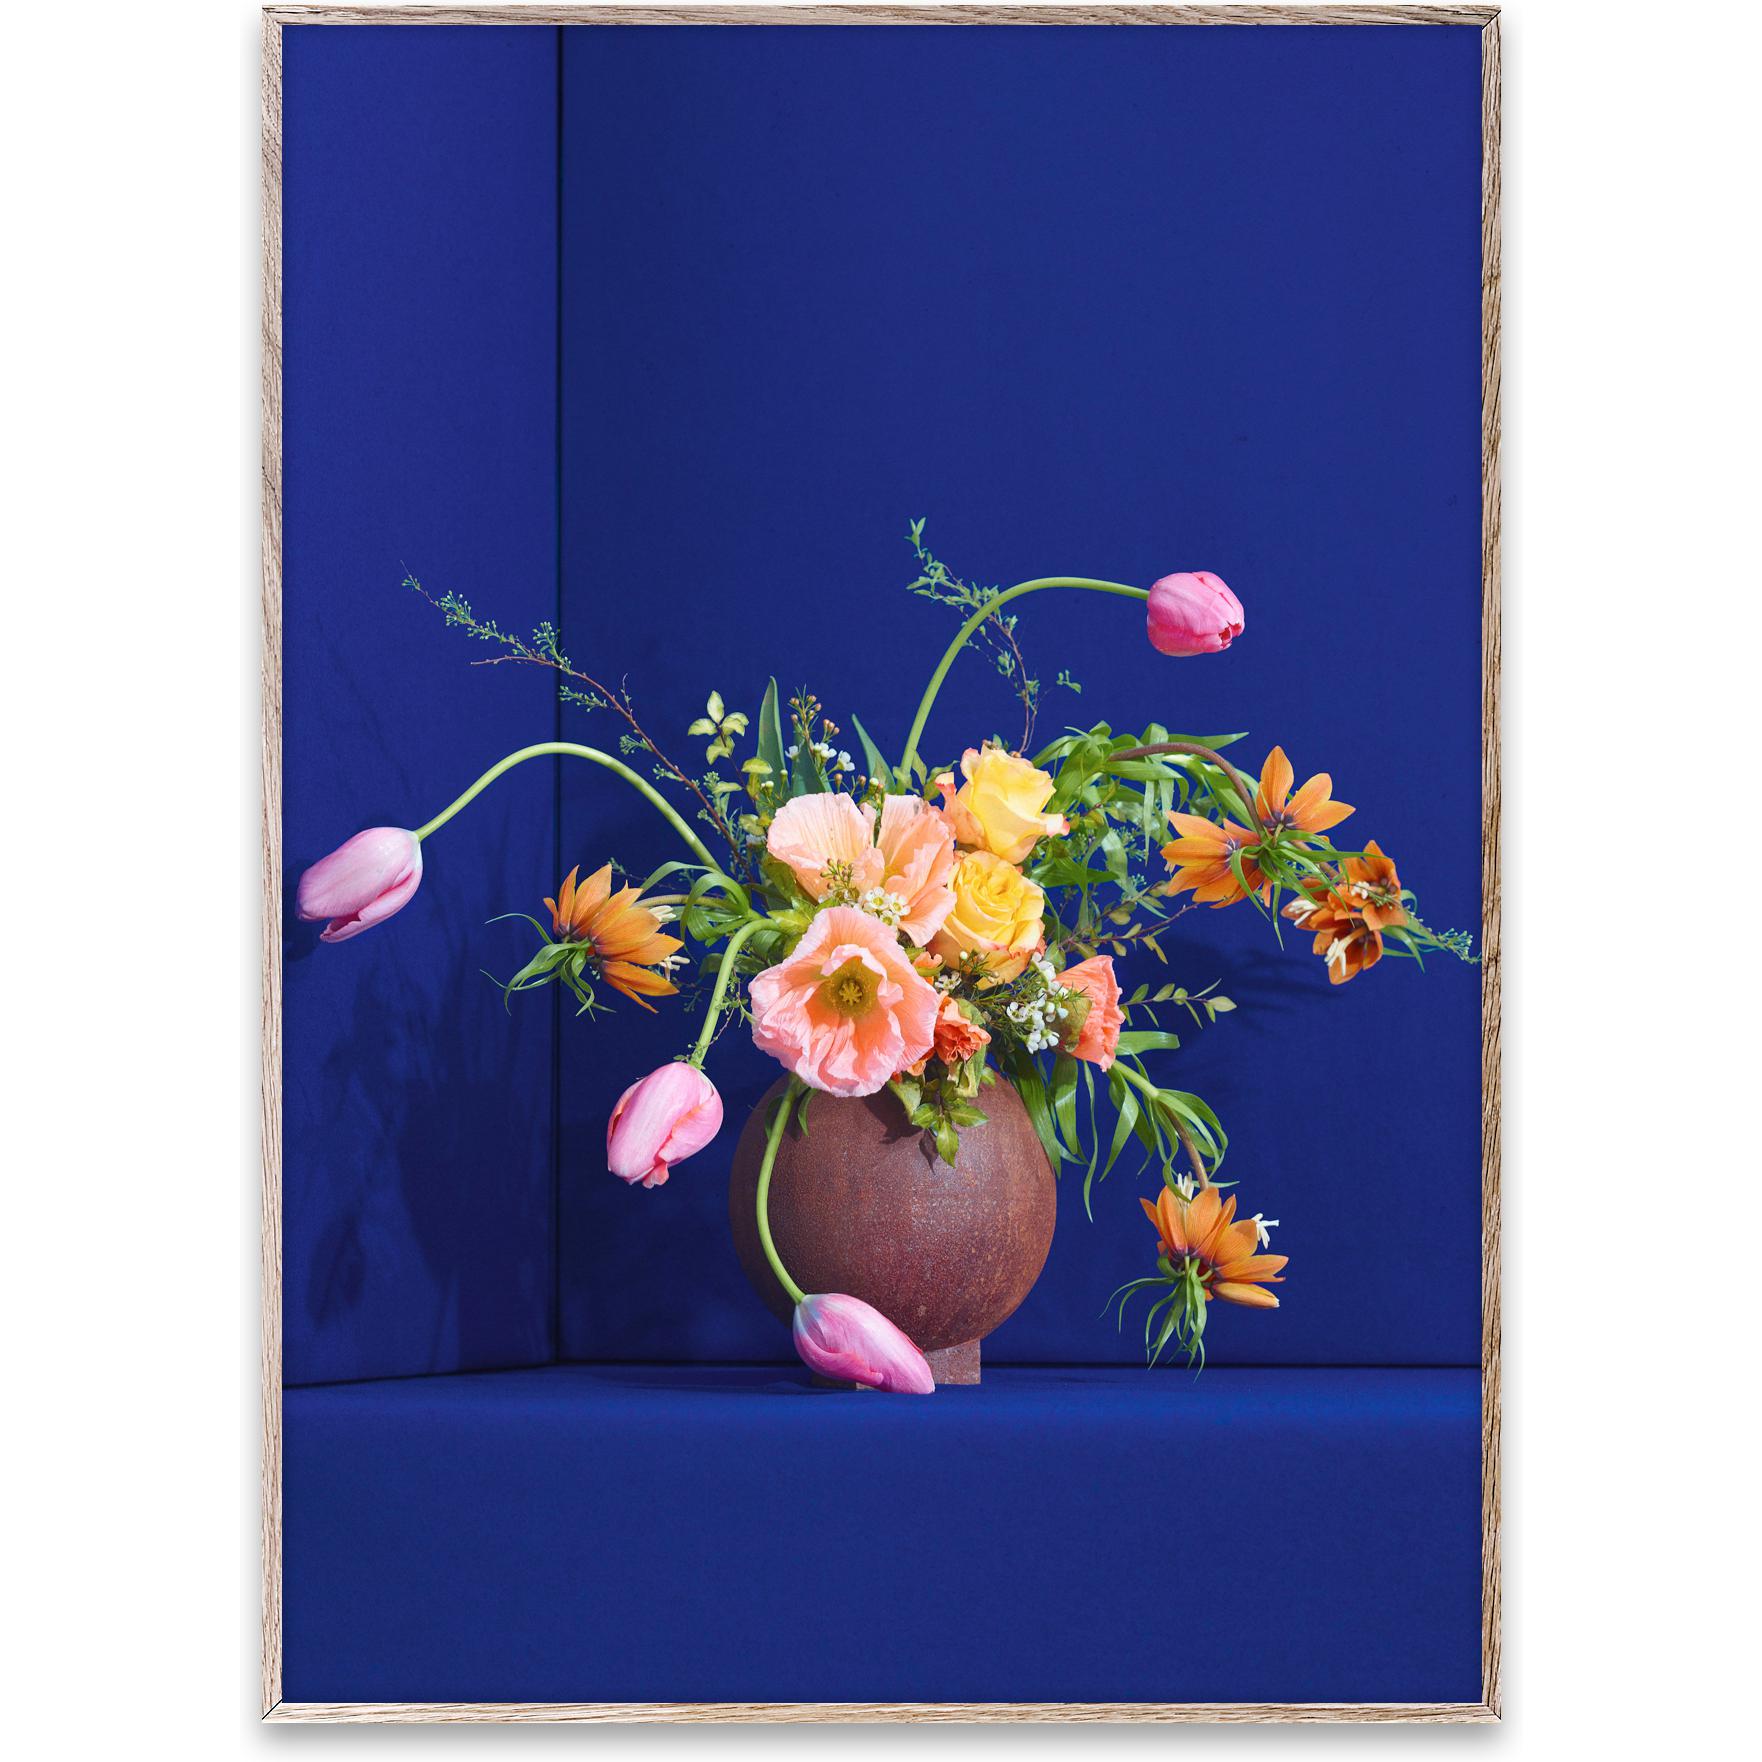 Paper Collective Blomst 01 Poster 70x100 Cm, Blue